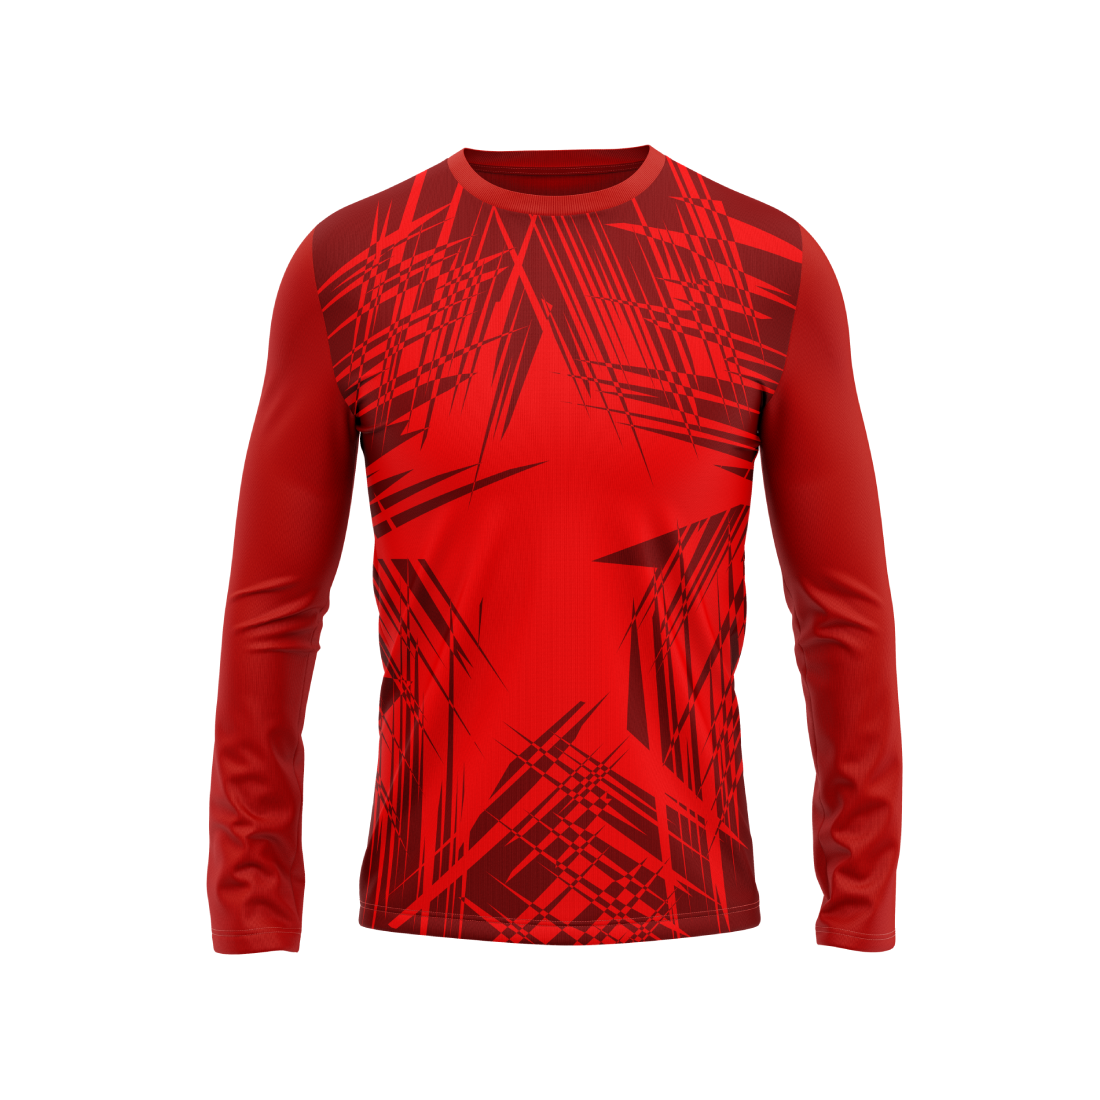 Round Neck Fullsleeve Printed Jersey Red NP5000026